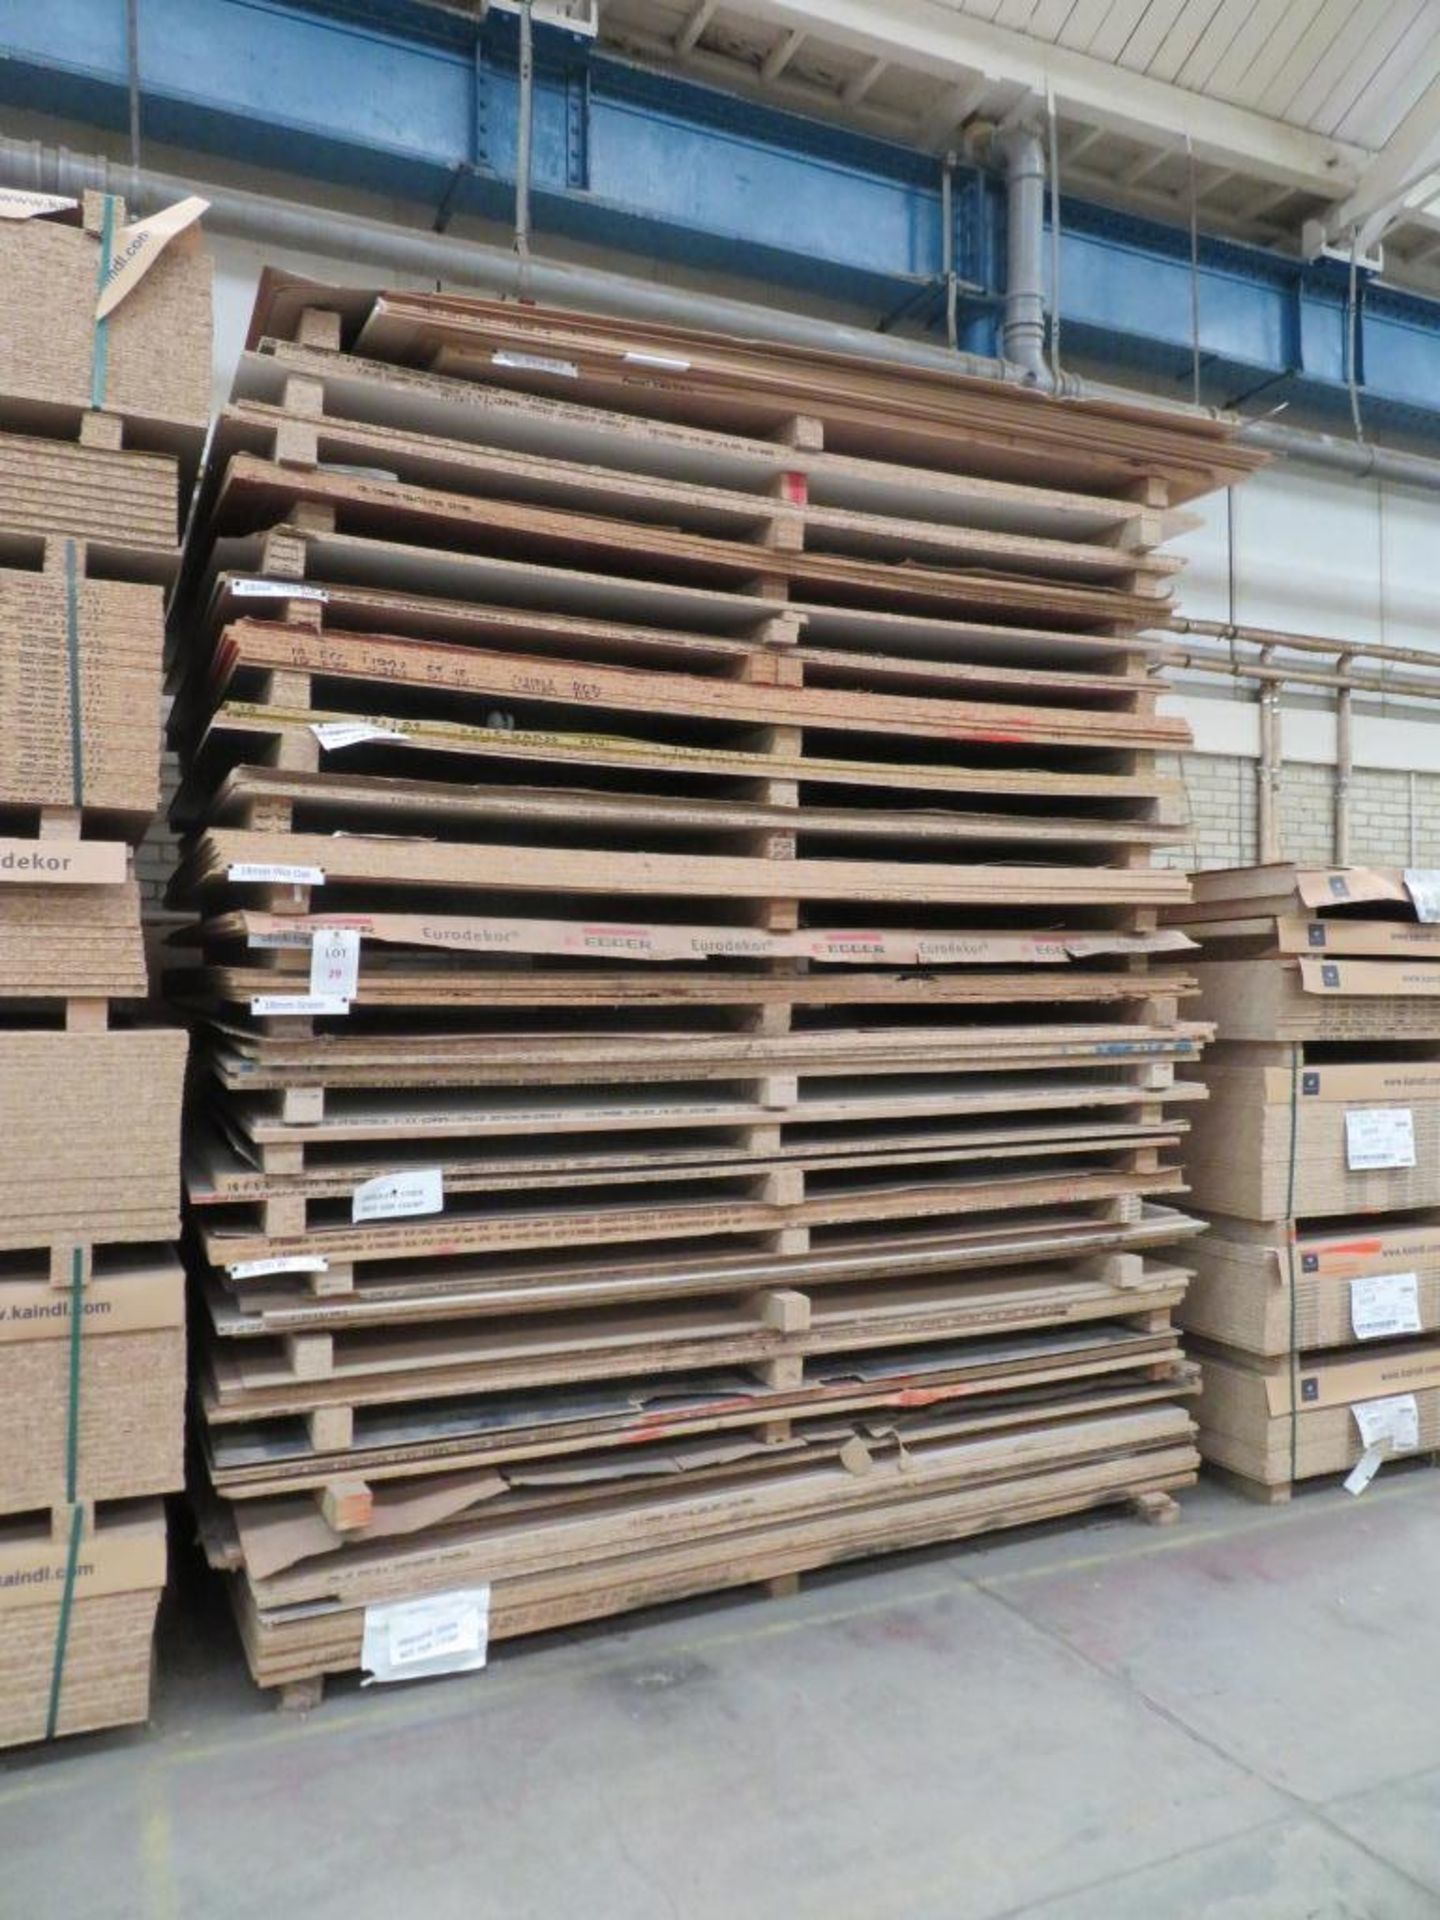 Approximately 72 mixed melamine faced chipboard panels